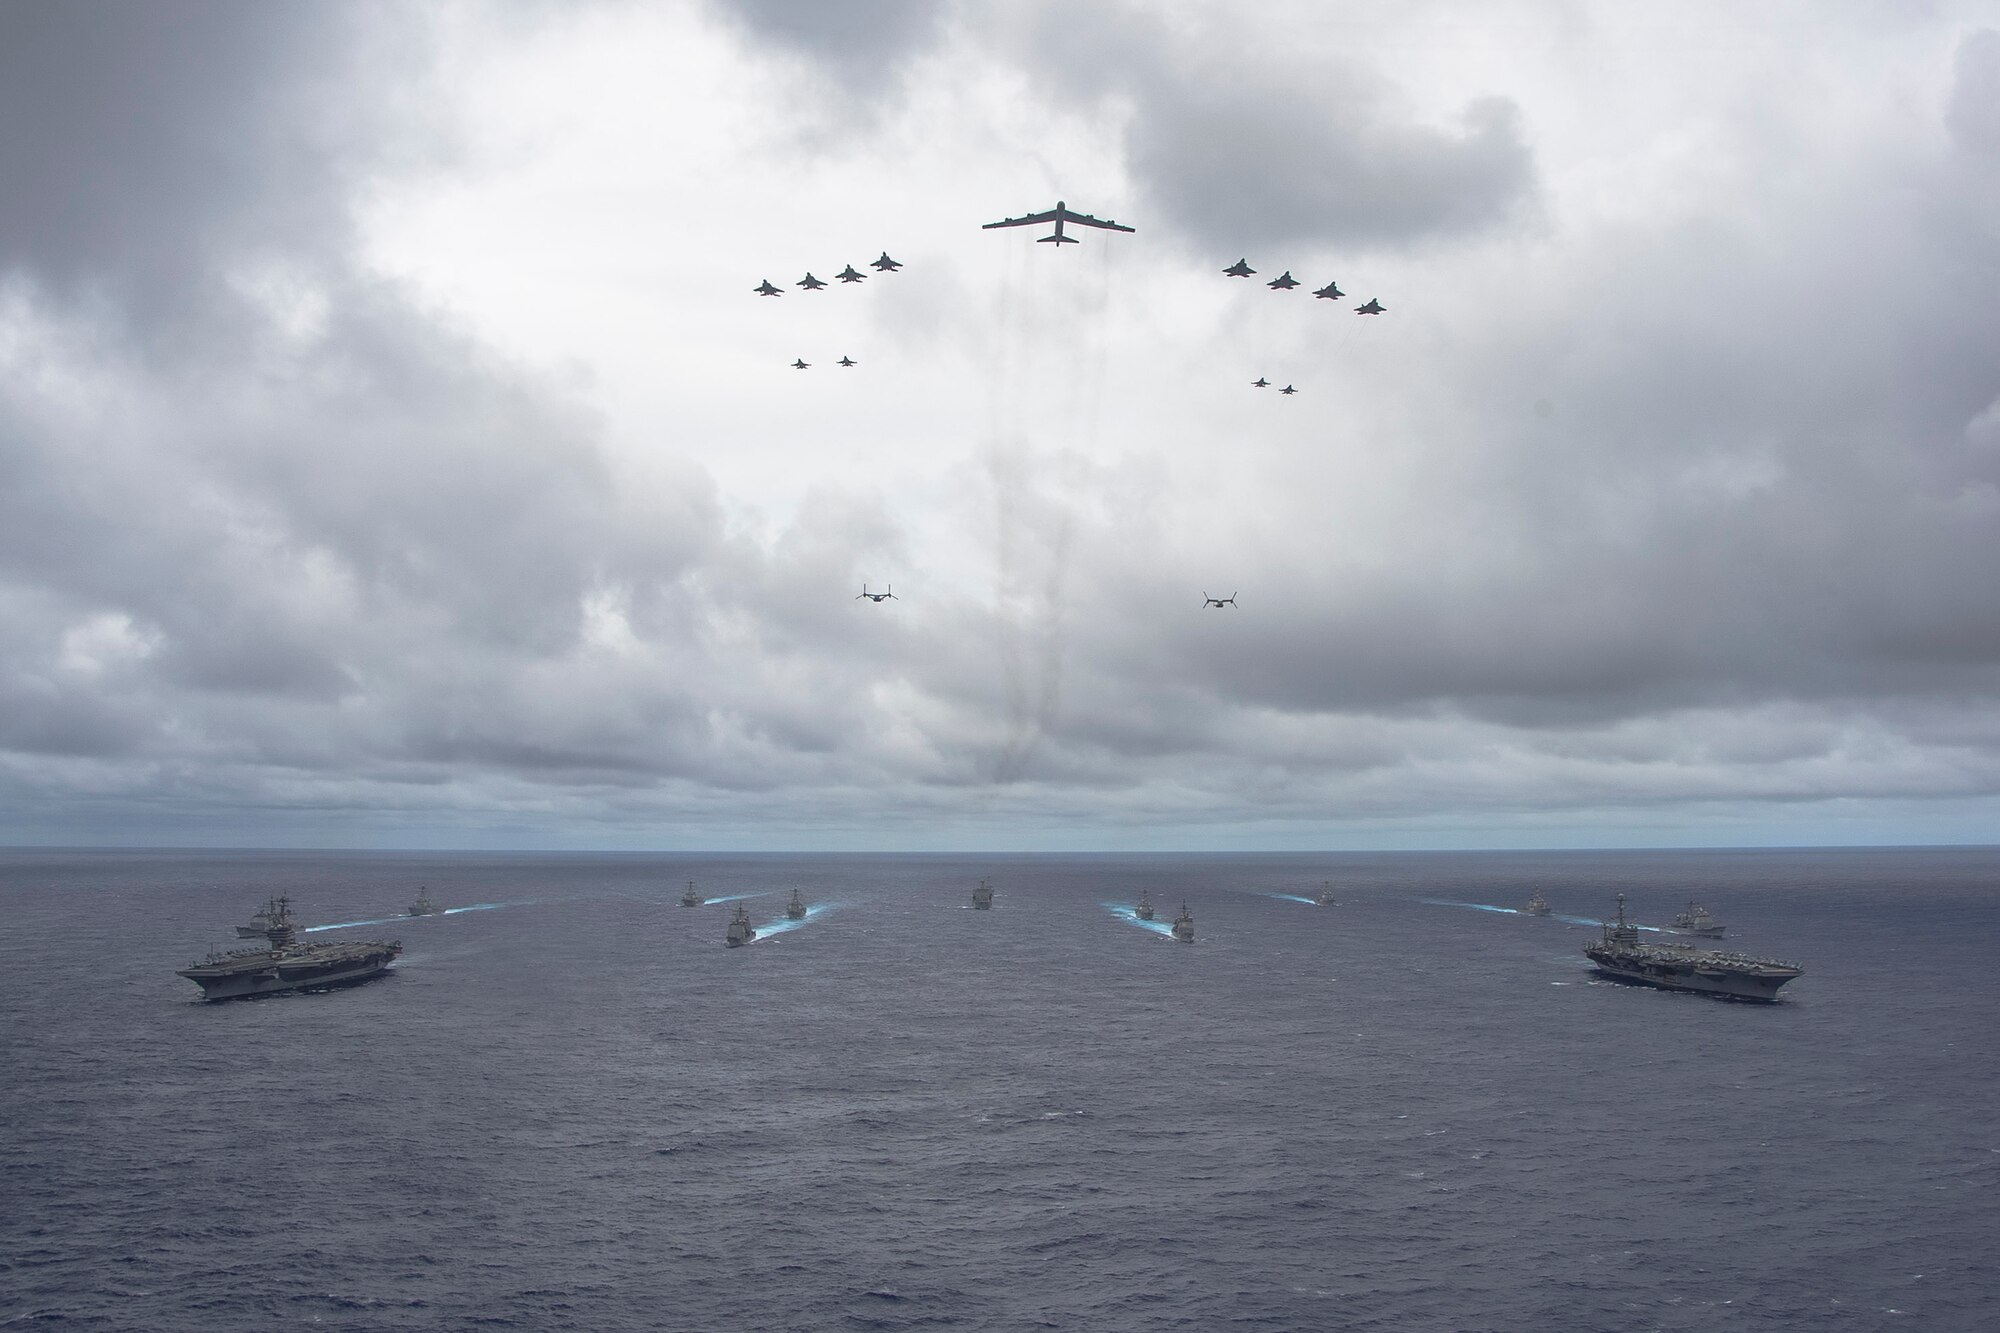 U.S. Navy ships from the George Washington and Carl Vinson Carrier Strike Groups and U.S. Air Force and Marine Corps aircraft operate in formation Sept. 23, 2014, at the conclusion of Valiant Shield 2014. Exercises like VS 14 provide the U.S. military the opportunity to integrate joint assets in an Air-Sea Battle environment, refining the military’s ability to defend U.S. interests and those of its allies and partners in the Pacific region. (U.S. Navy photo by Mass Communication Specialist 1st Class Trevor Welsh/Released)